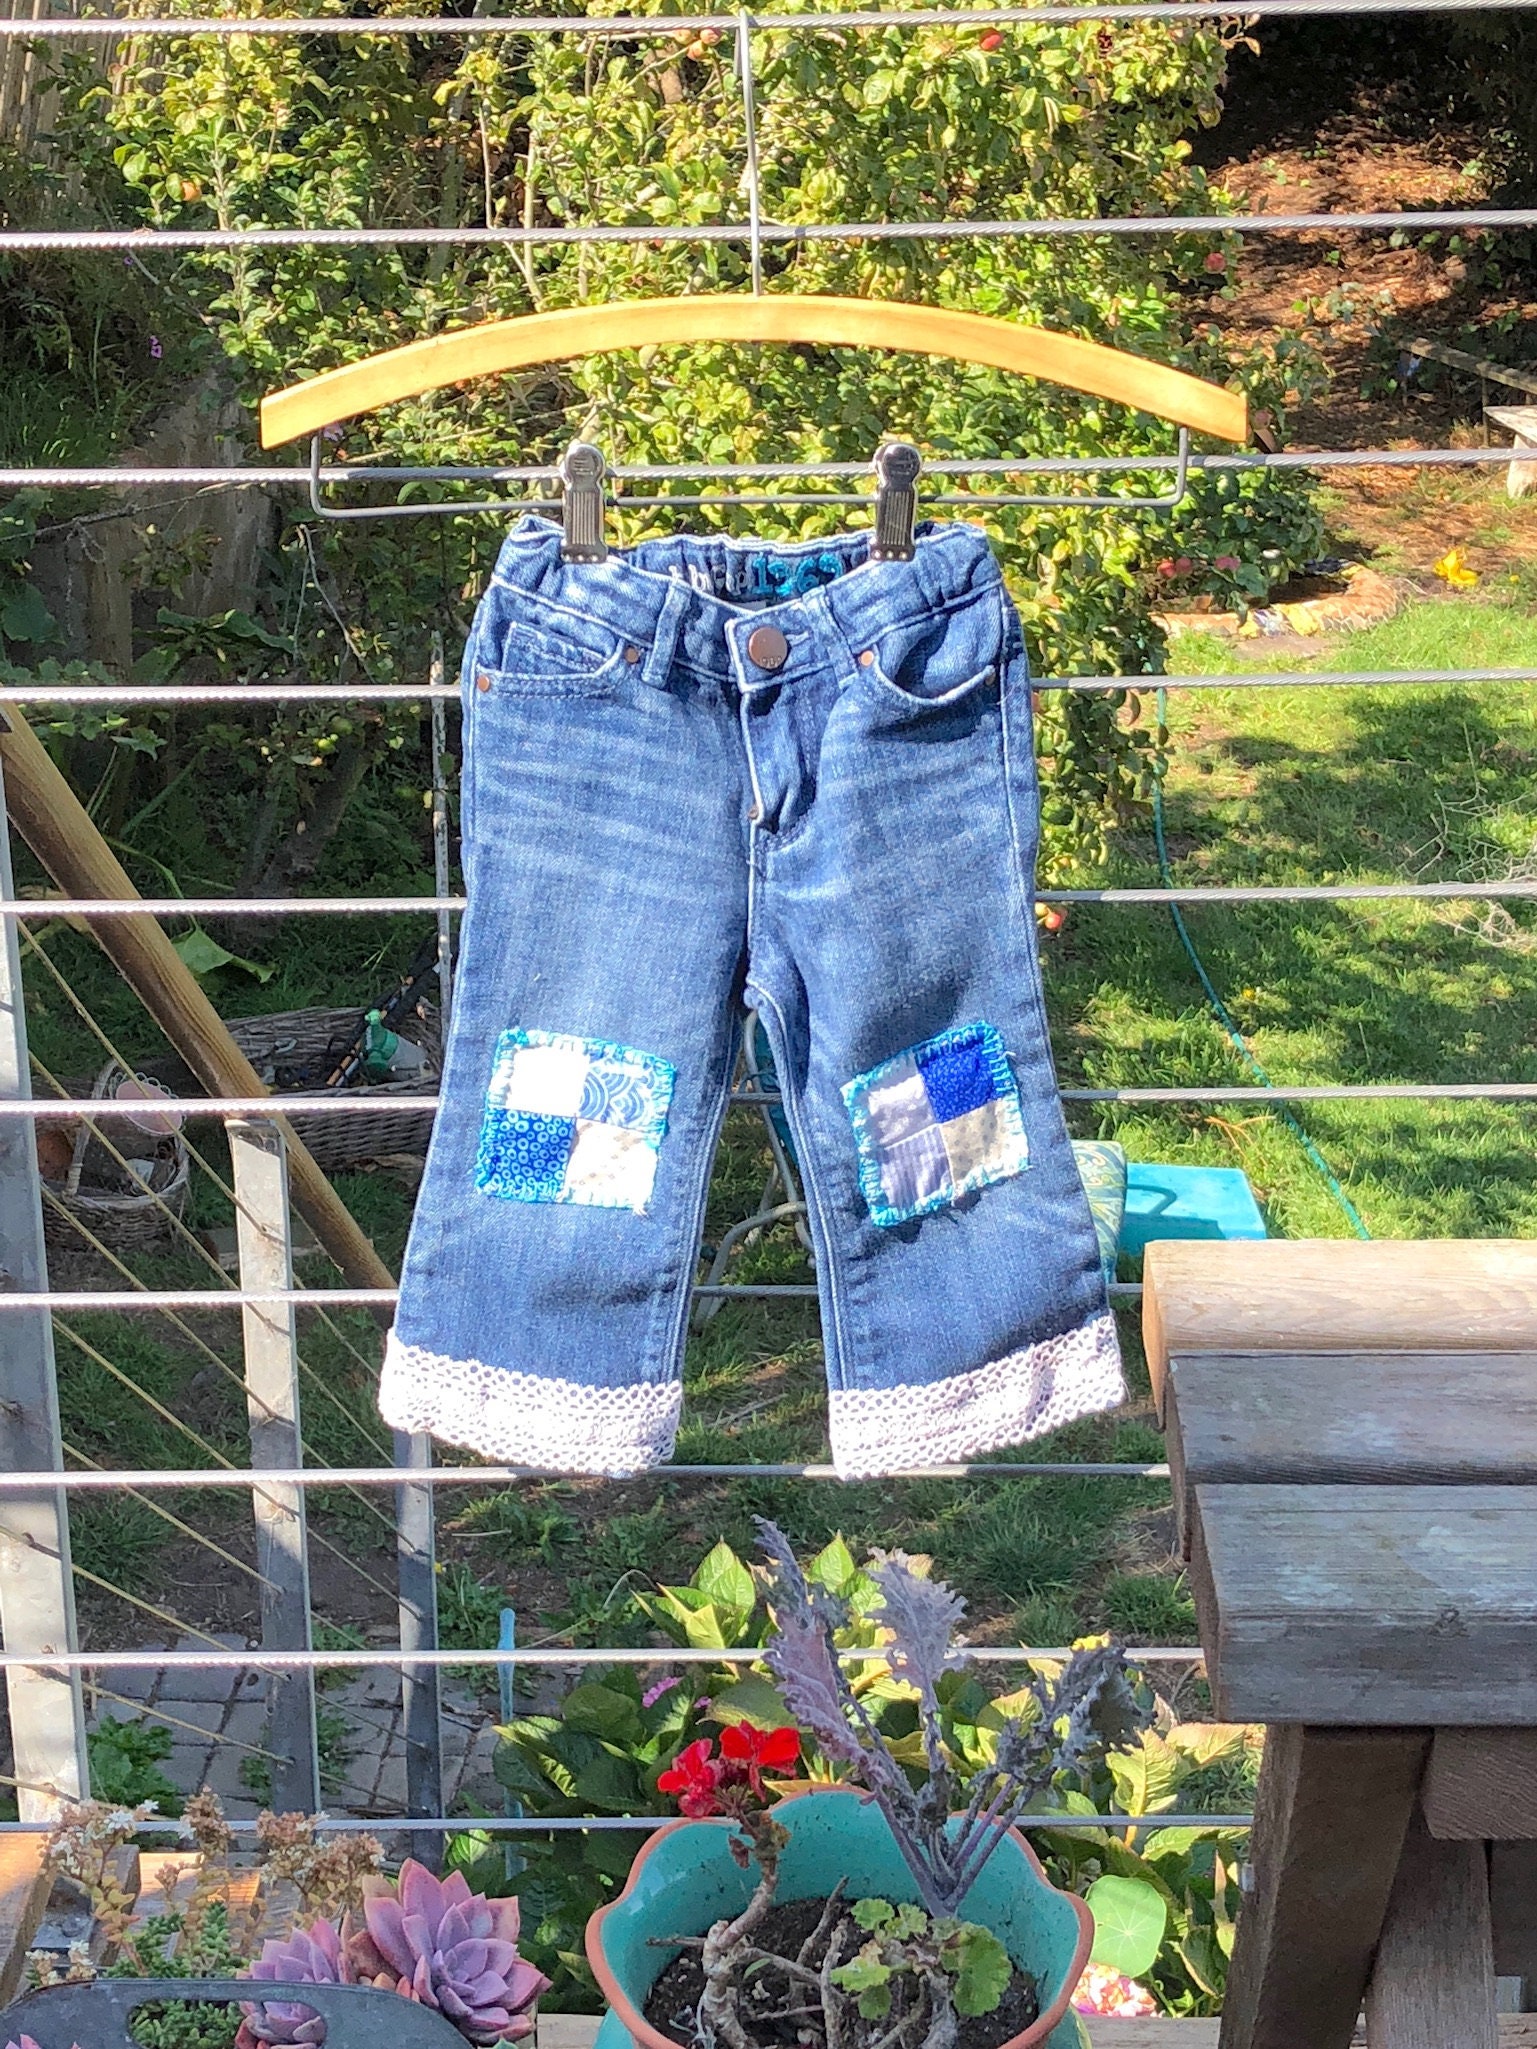 flared jeans size 18